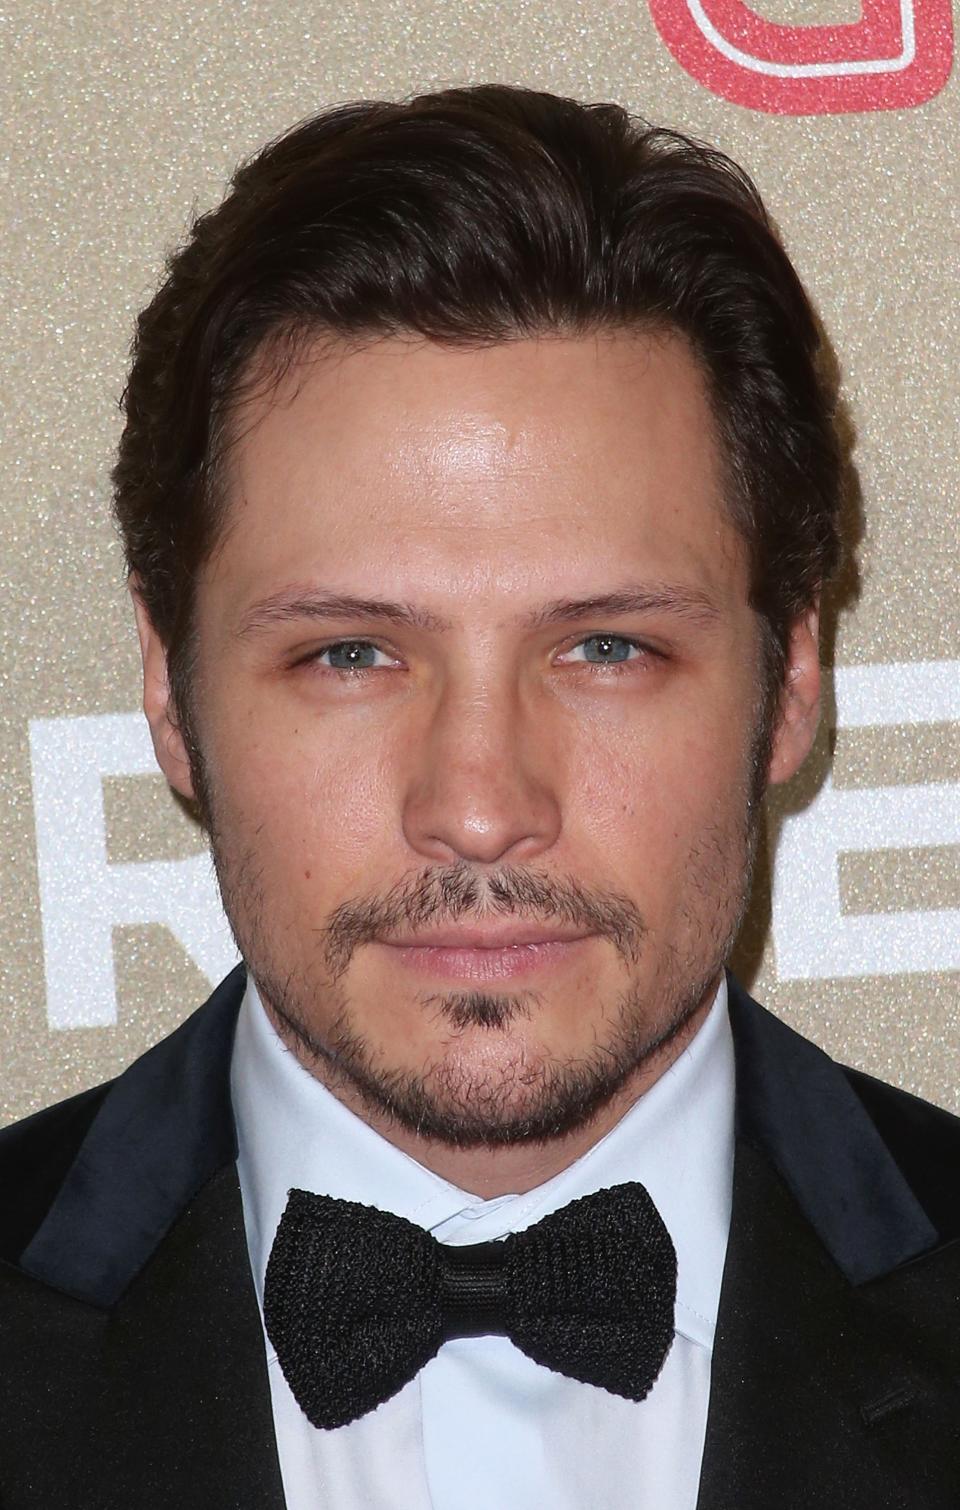 LOS ANGELES, CA - DECEMBER 02: Actor Nick Wechsler attends the CNN Heroes: An All Star Tribute at The Shrine Auditorium on December 2, 2012 in Los Angeles, California. (Photo by Frederick M. Brown/Getty Images)